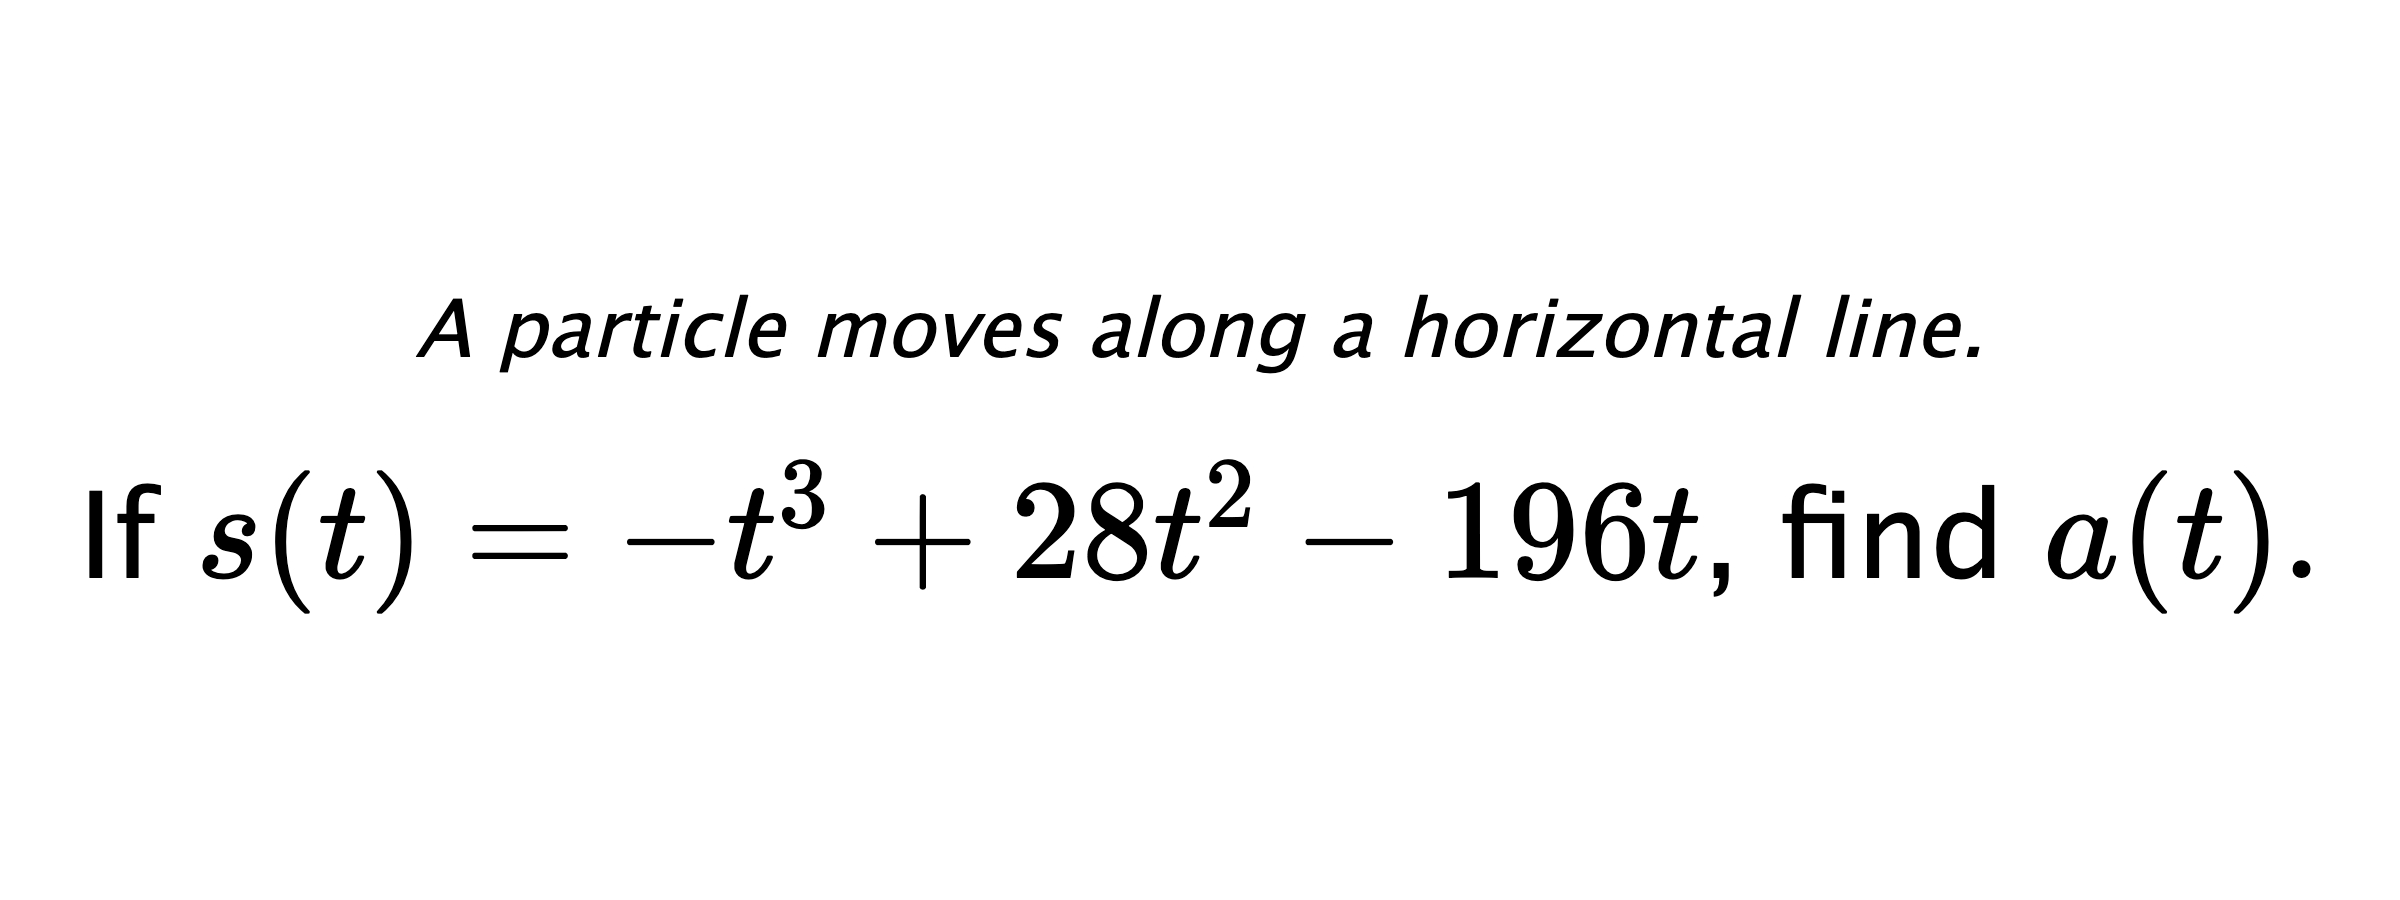 A particle moves along a horizontal line. If $ s(t)=-t^3+28t^2-196t $, find $ a(t) .$